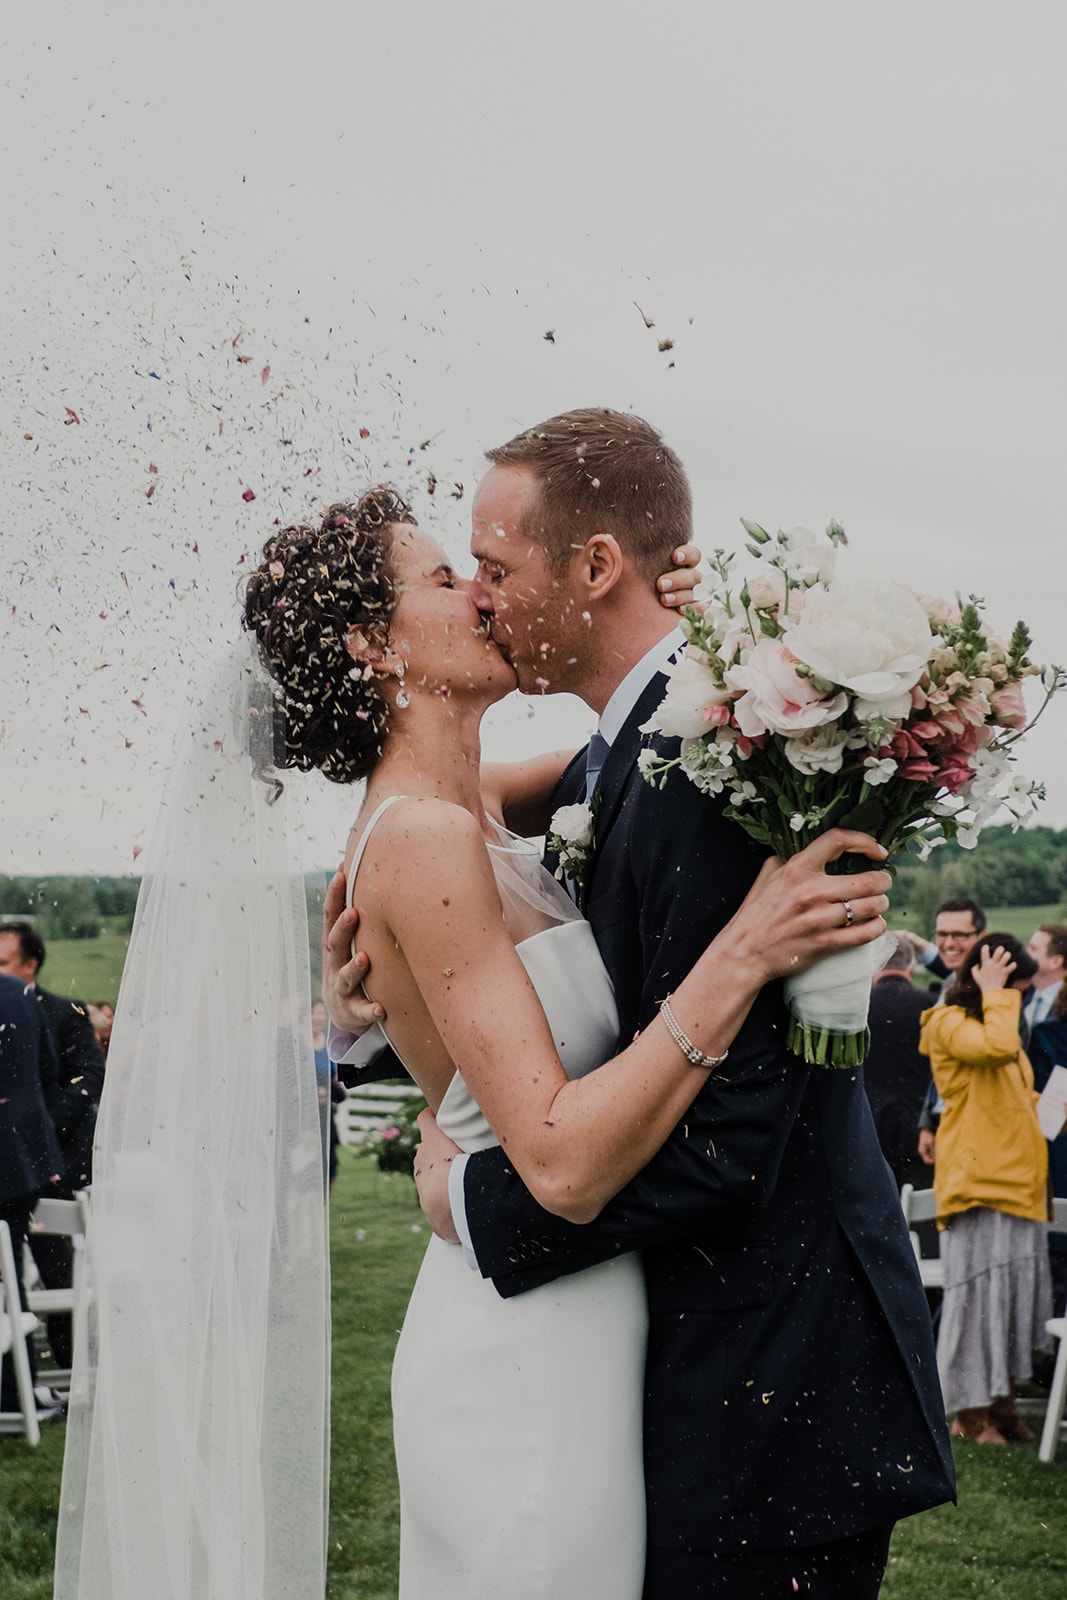 A bride and groom kiss in the aisle after their outdoor wedding ceremony at Blue Hill Farm in Waterford, VA as guests toss flower petal confetti.  